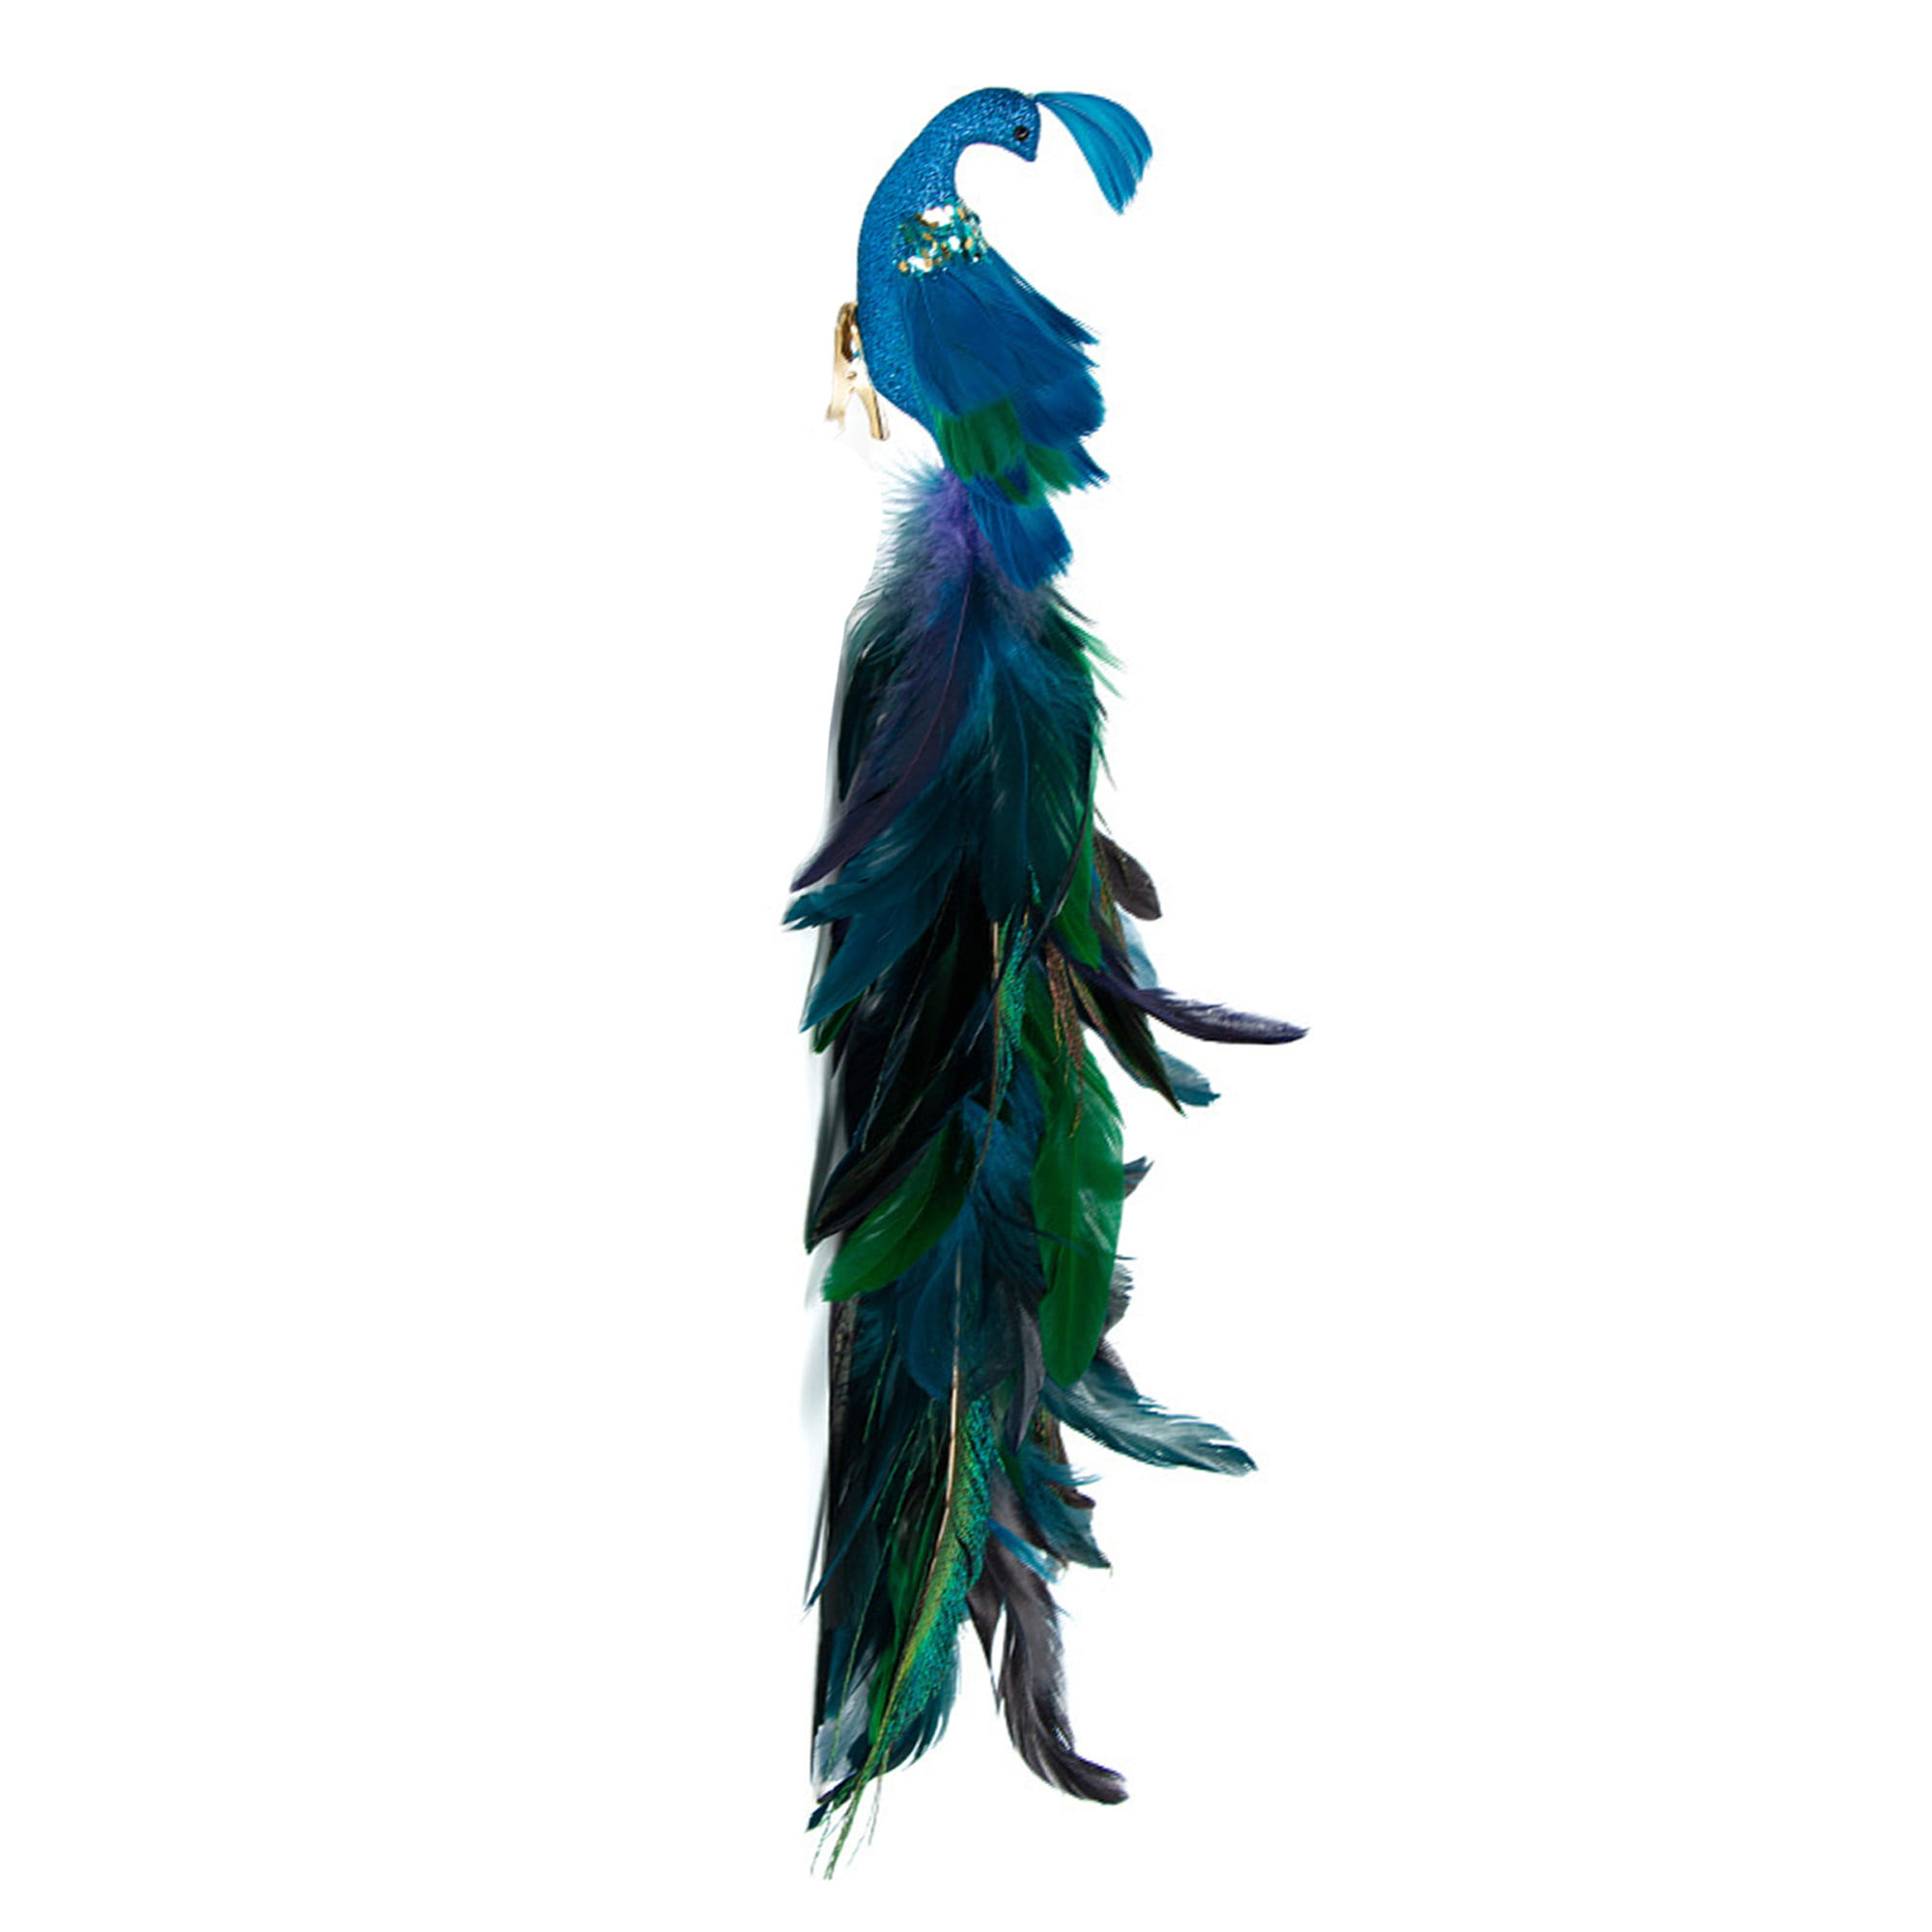 BestAlice 2 Pcs Blue Peacock Christmas Ornaments, 20 inch Long Tail Feather Peacock Clip Ornament, Glittered Phoenix Christmas Ornament, Faux